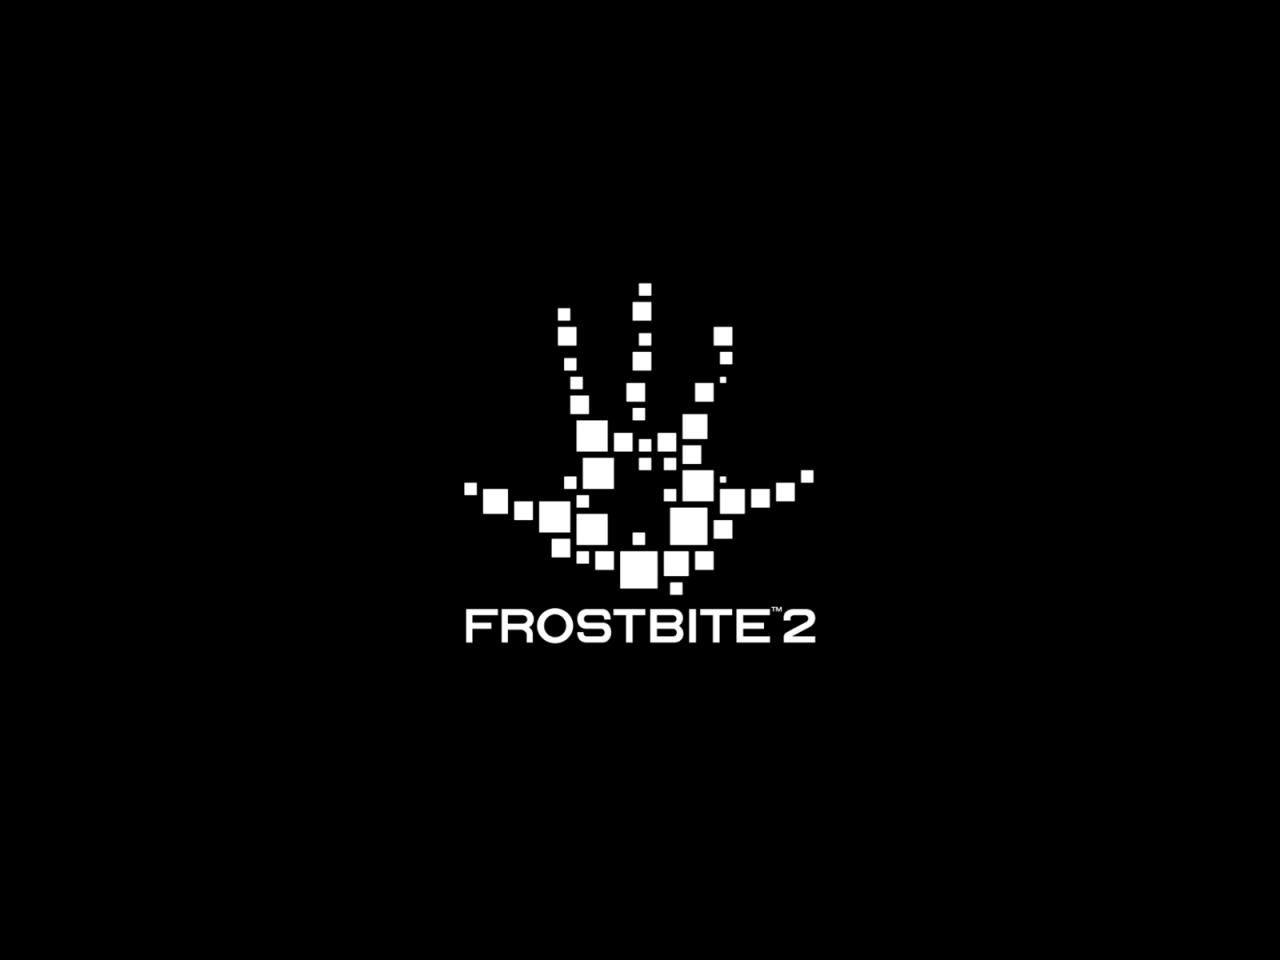 Frostbite 2 for 1280 x 960 resolution